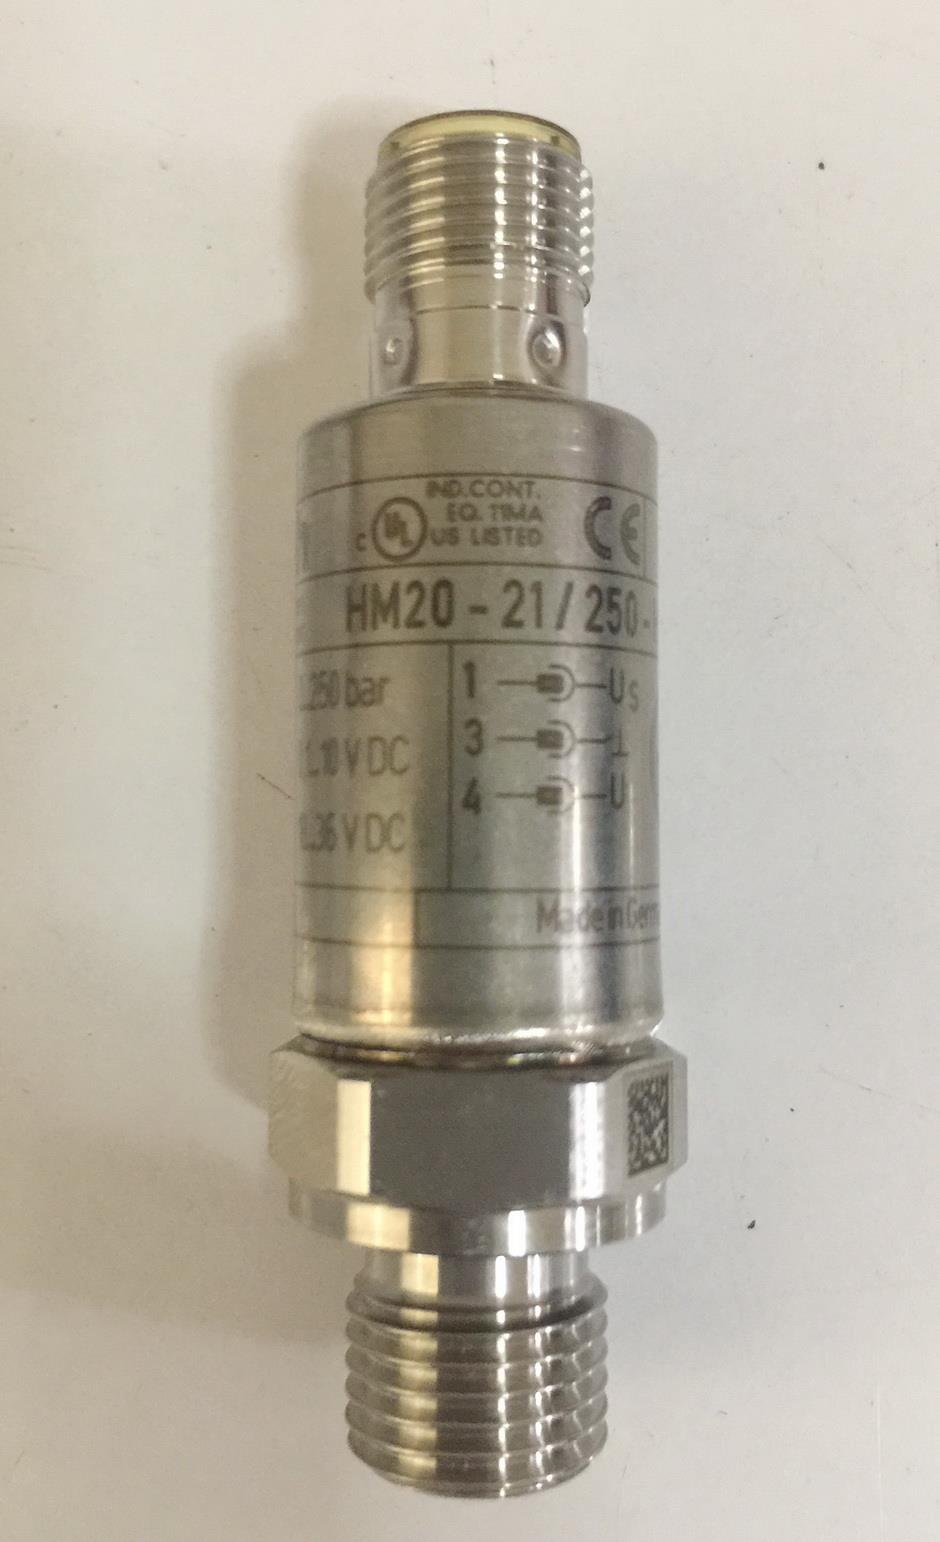 Rexroth HM20 Pressure Transducer,Pressure Sensor,Pressure Transmitter, Pressure Transducer, Pressure Control, Rexroth, R901342027,Rexroth,Automation and Electronics/Automation Systems/Factory Automation